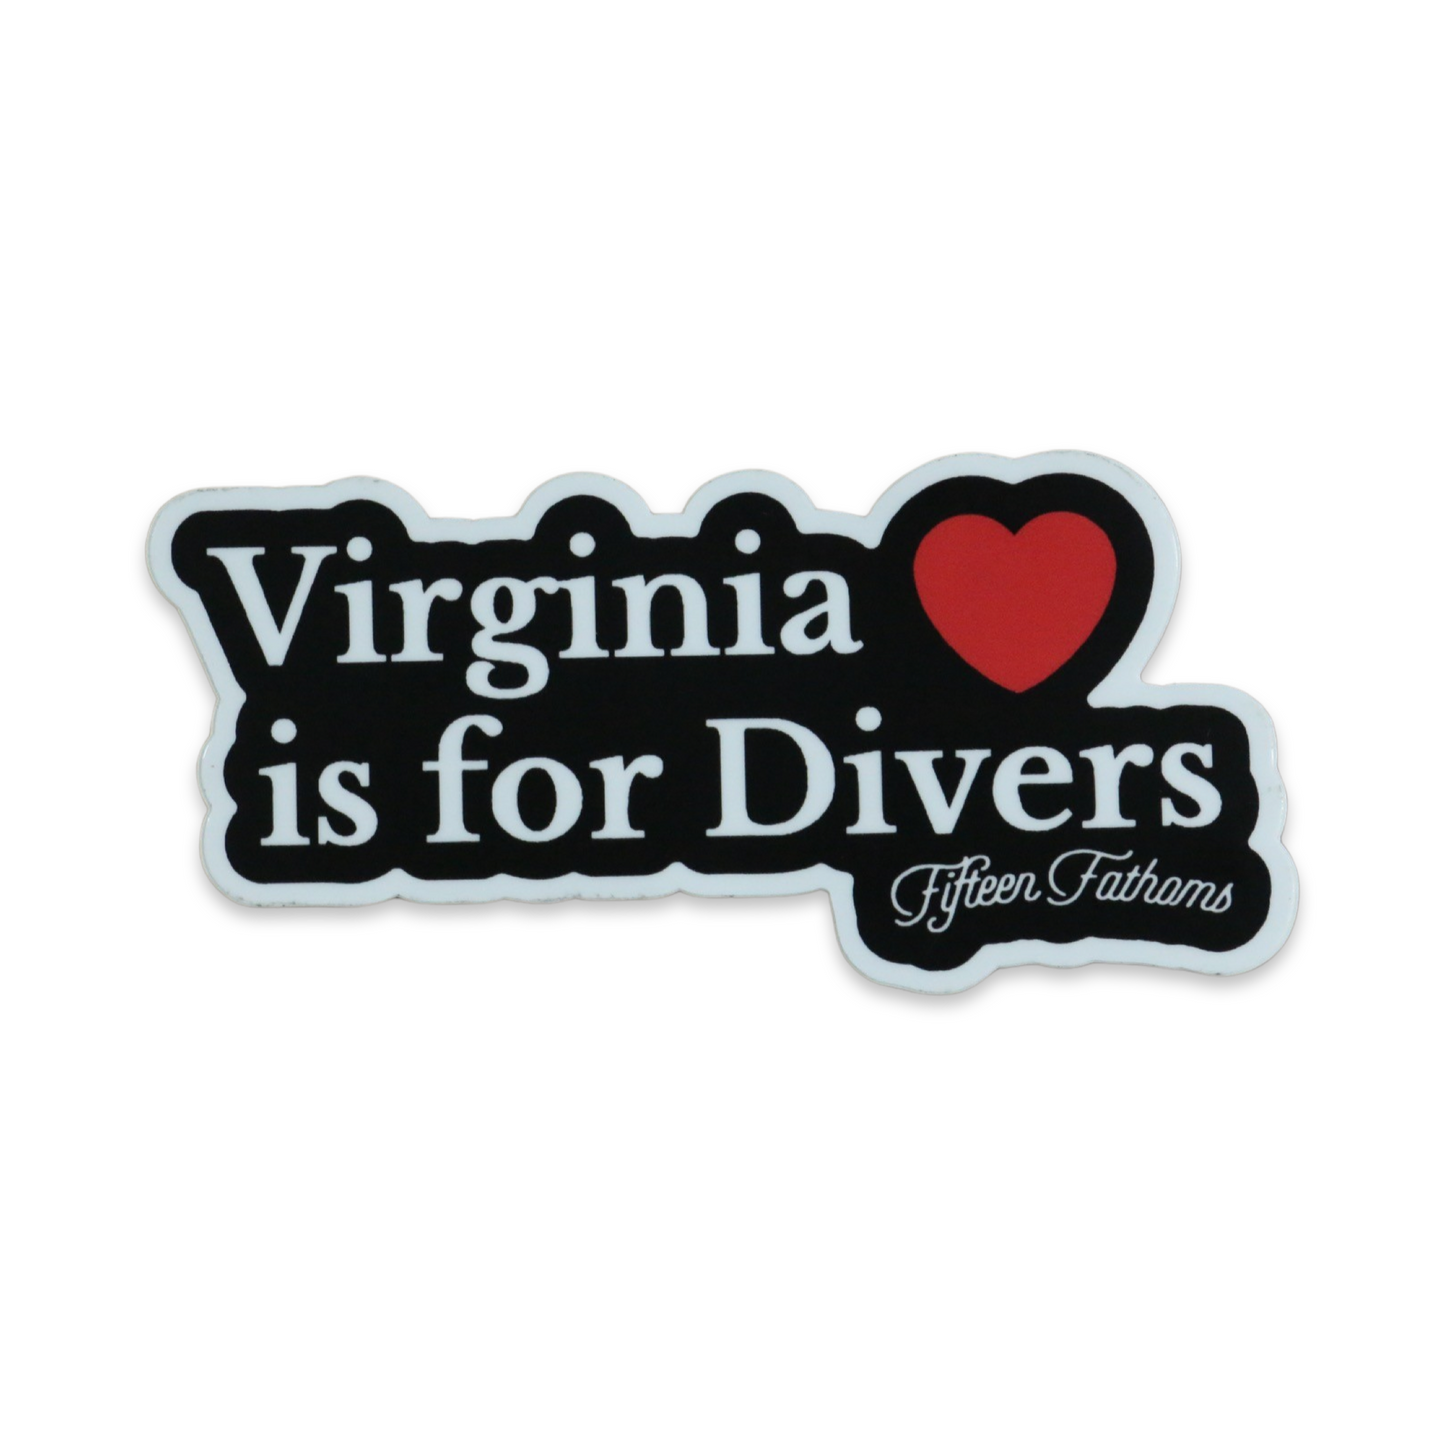 Inspired by the classic "Virginia is for Lovers" slogan, our newest sticker is for all of our Virginia divers.    Length: 5 inches  Height: 2.5 inches